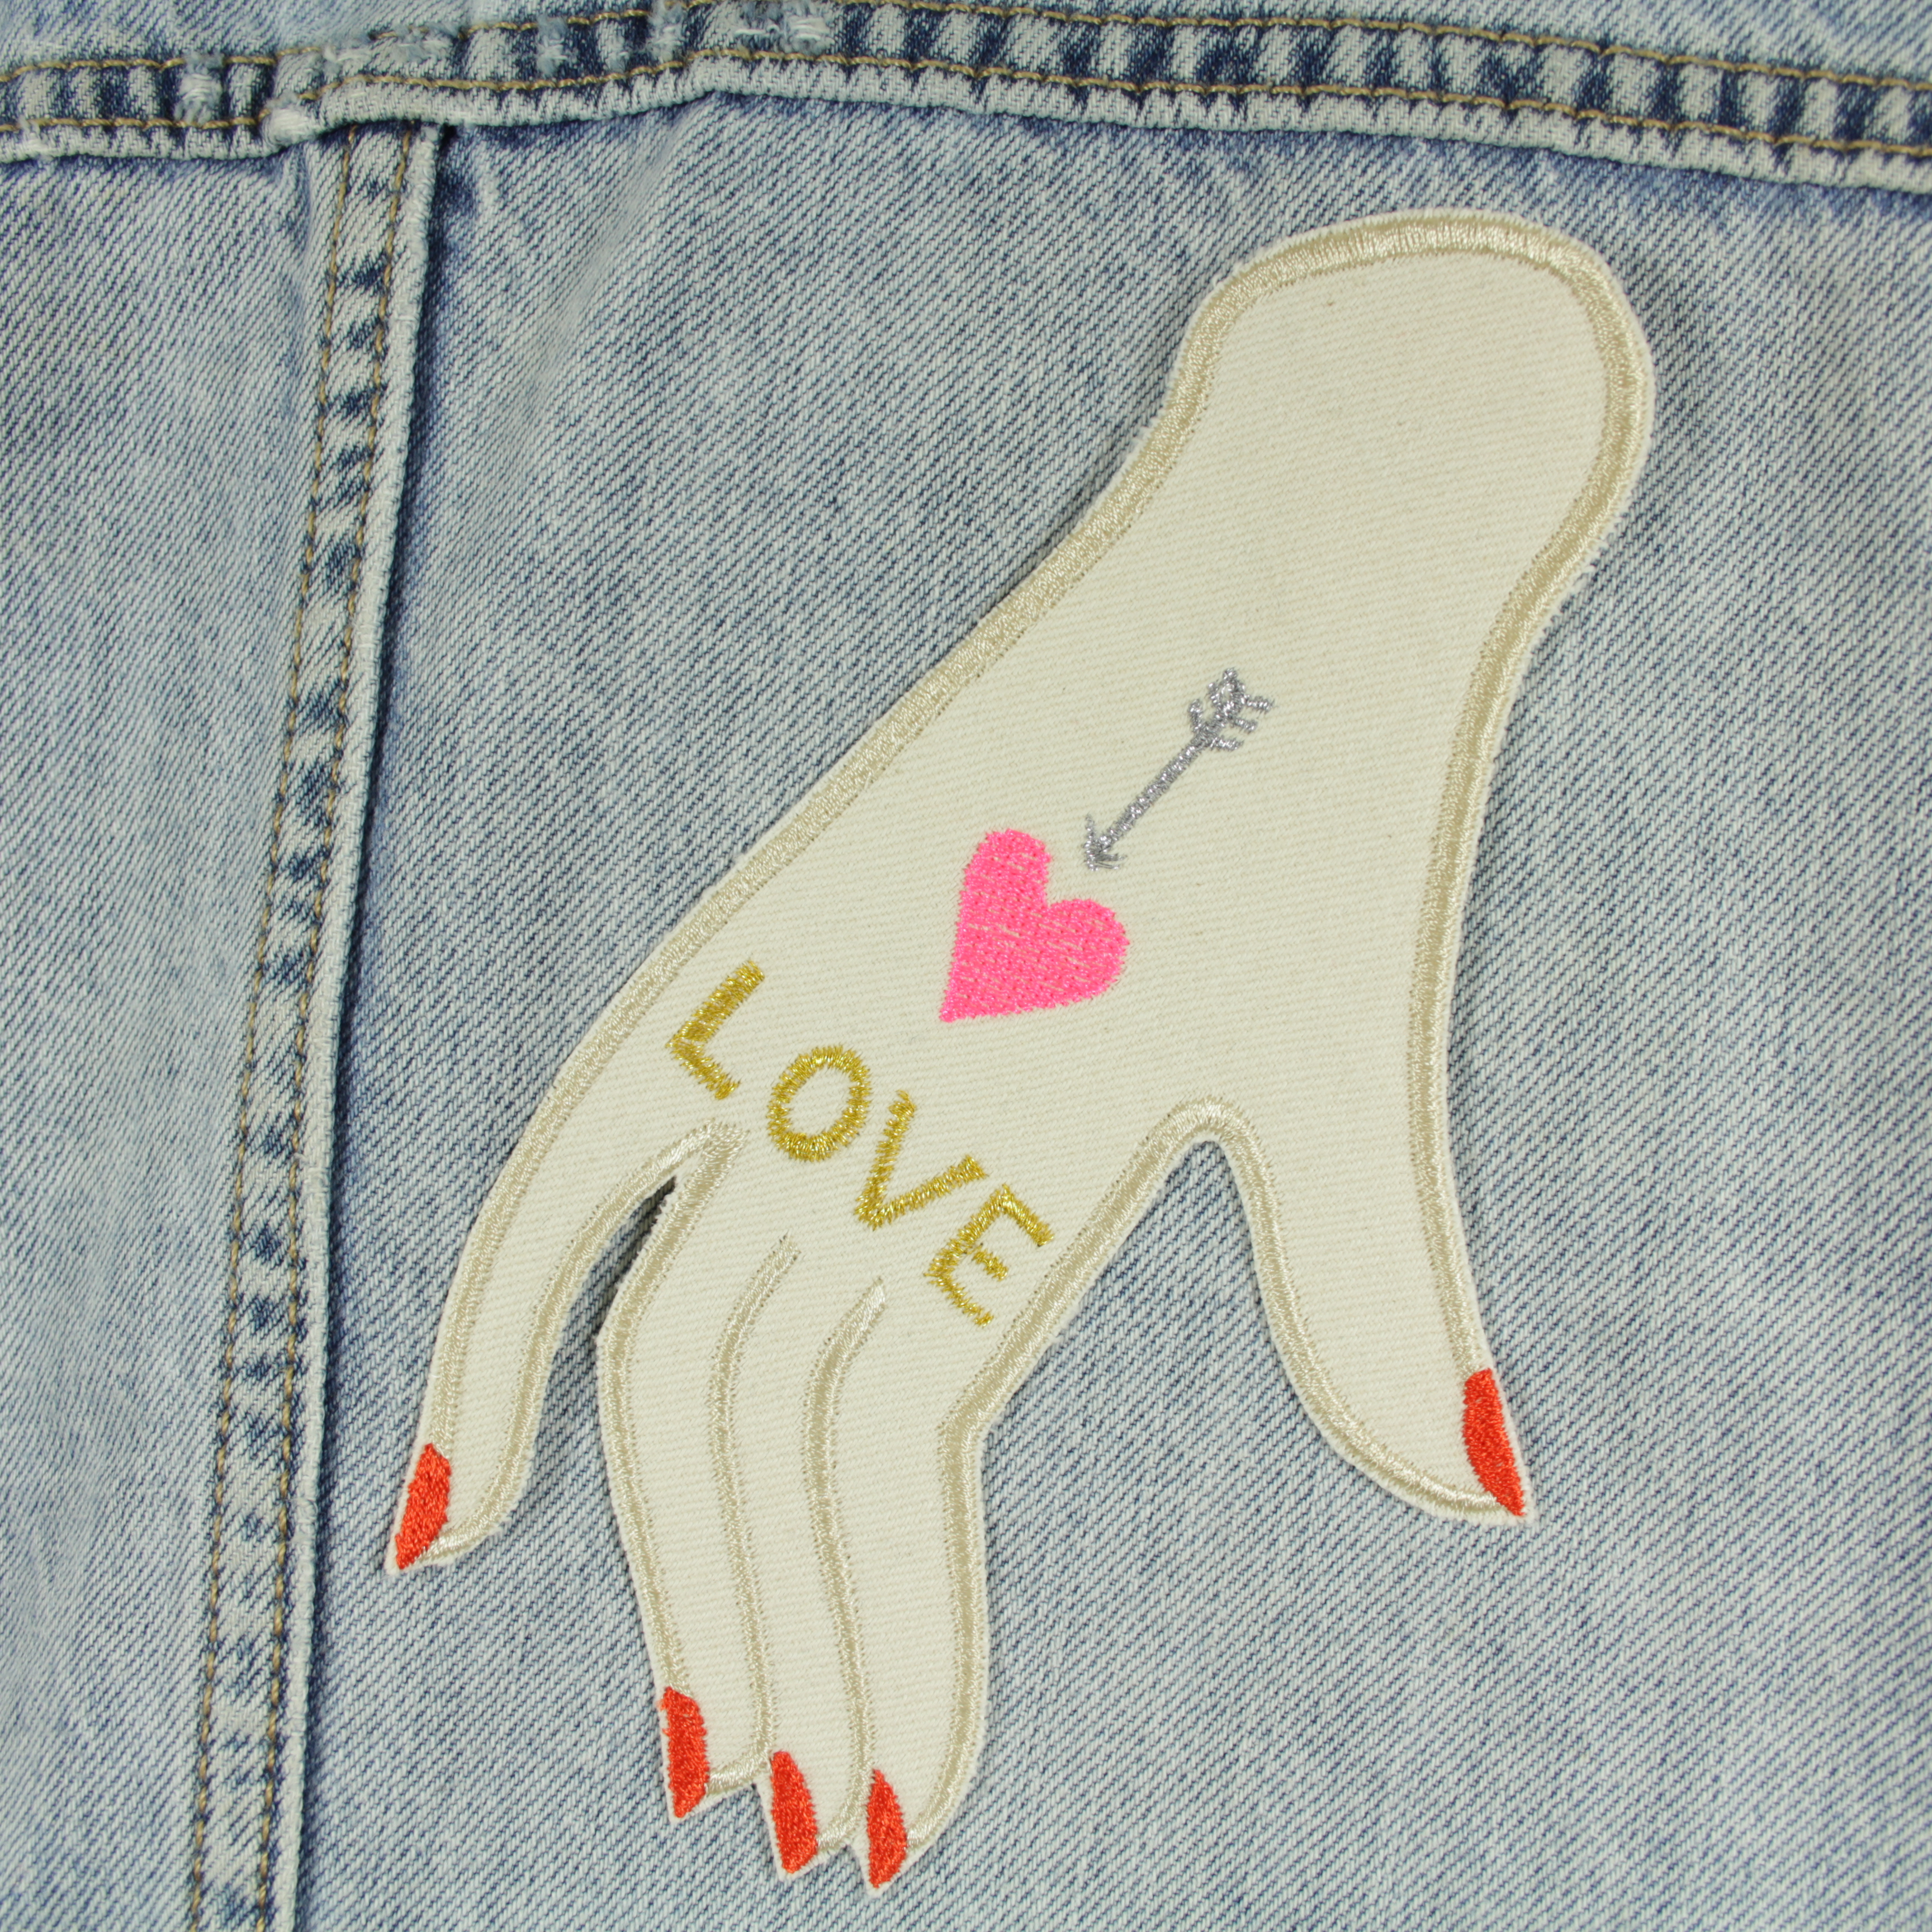 Patch hand "LOVE" large iron-on image gold embroidered on organic canvas for adults